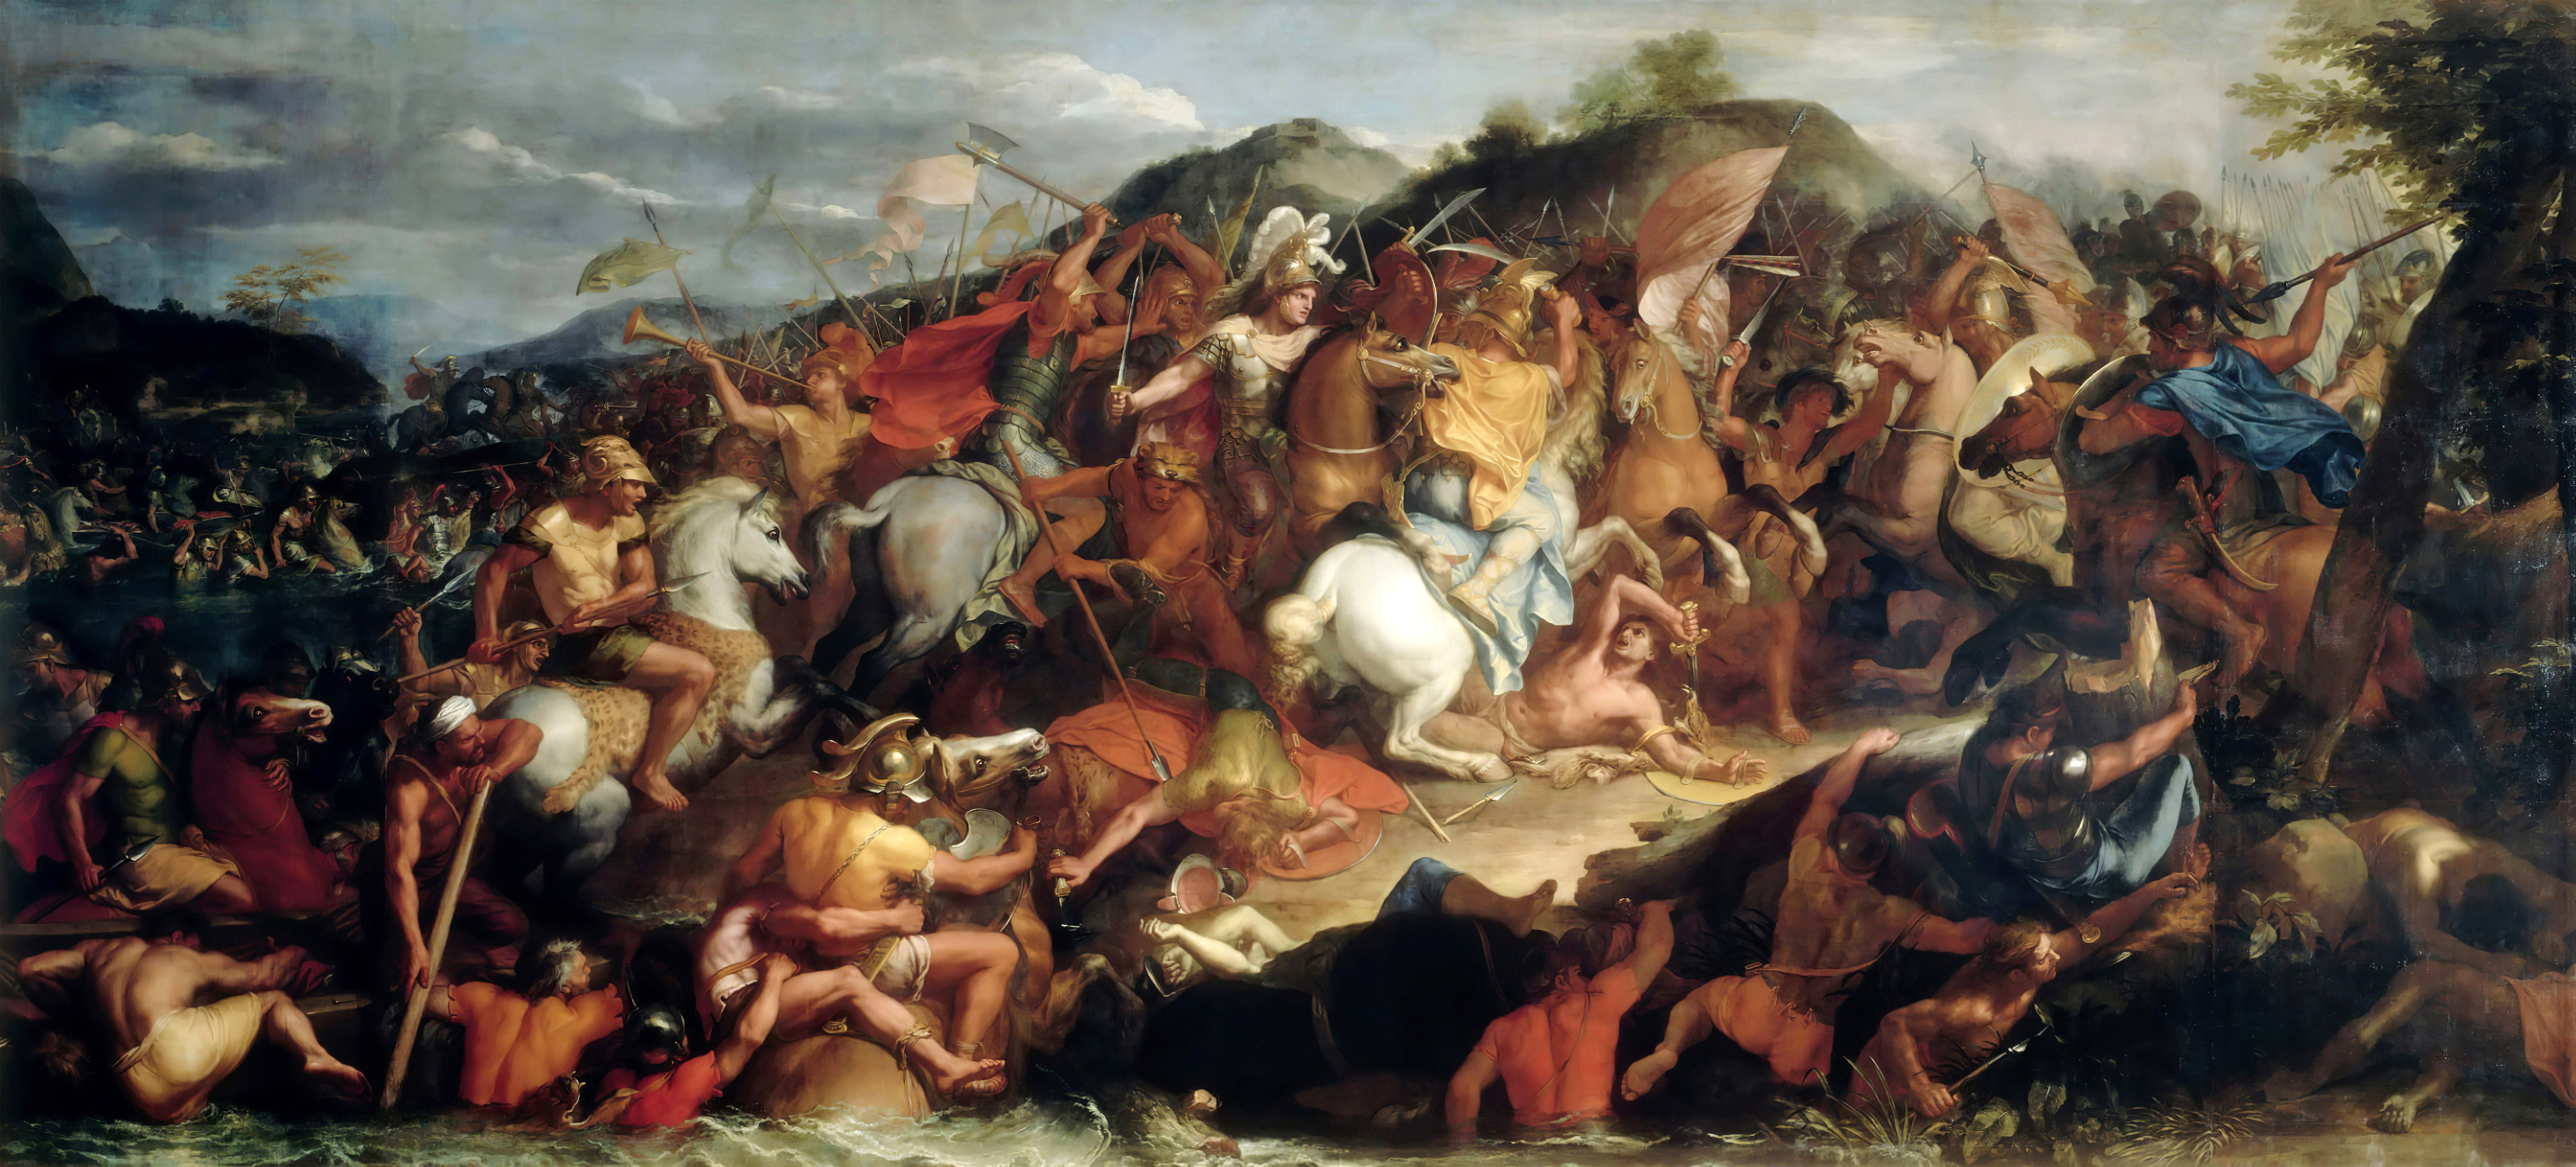 General 5600x2538 Charles Le Brun The Battle of the Granicus River Alexander the Great history classic art